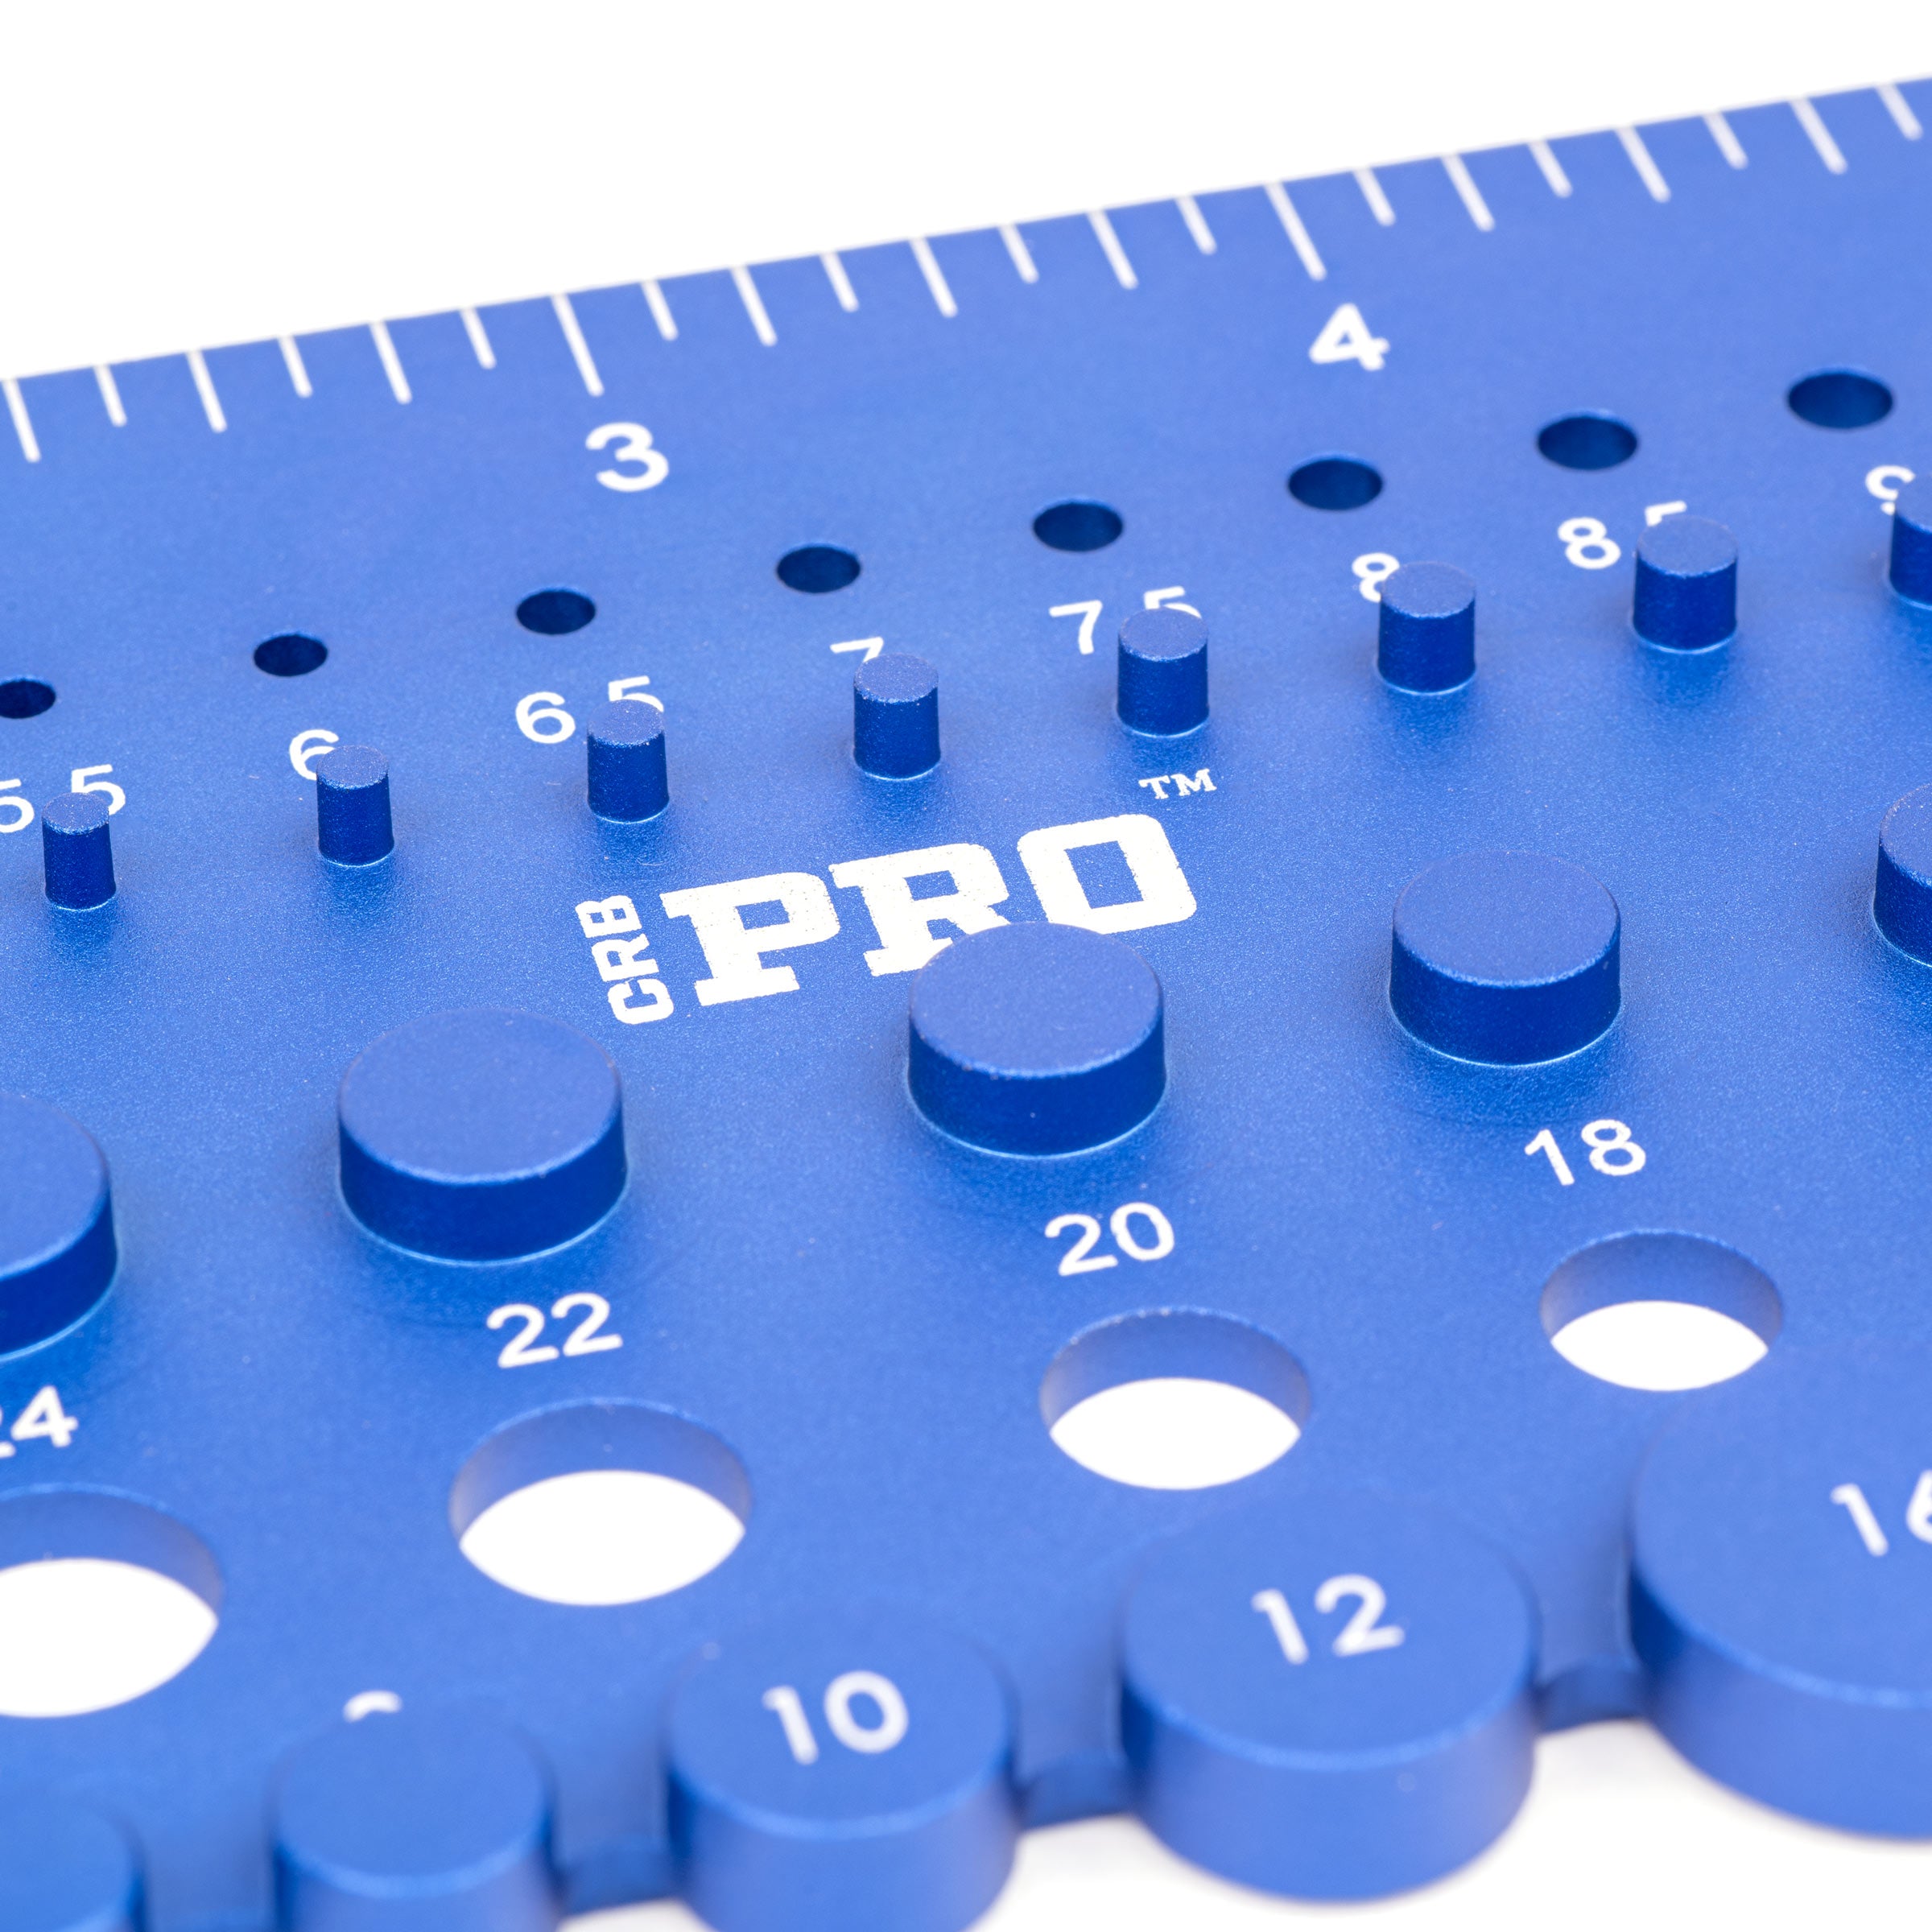 Rod Builder's Adhesive-Backed Measuring Tape & Conversion Chart